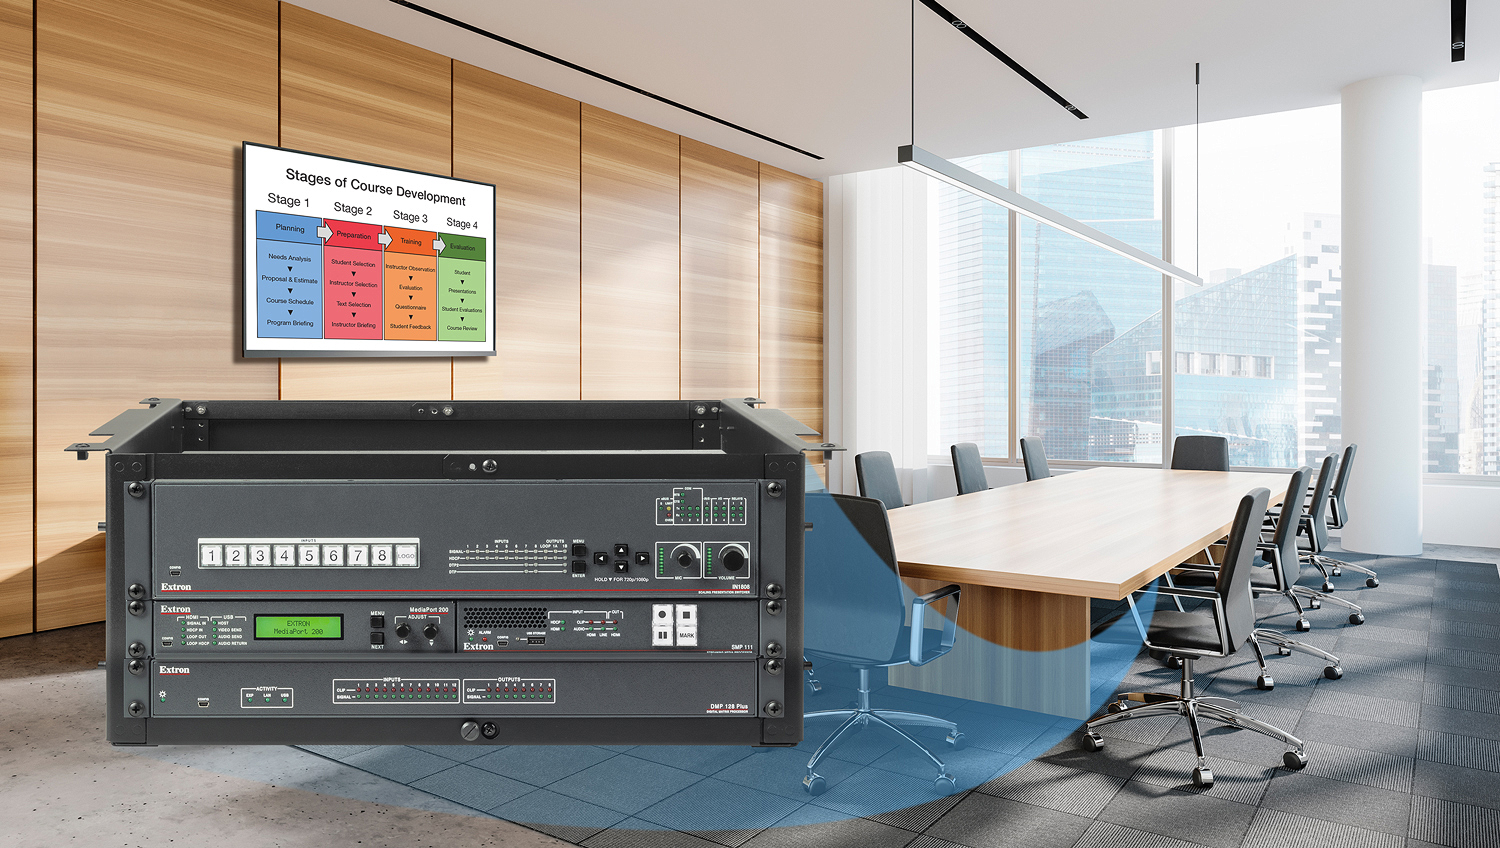 The UTR 104 rack provides convenient access to equipment mounted beneath a tabletop or other furniture surface for environments without racks or remote rack space